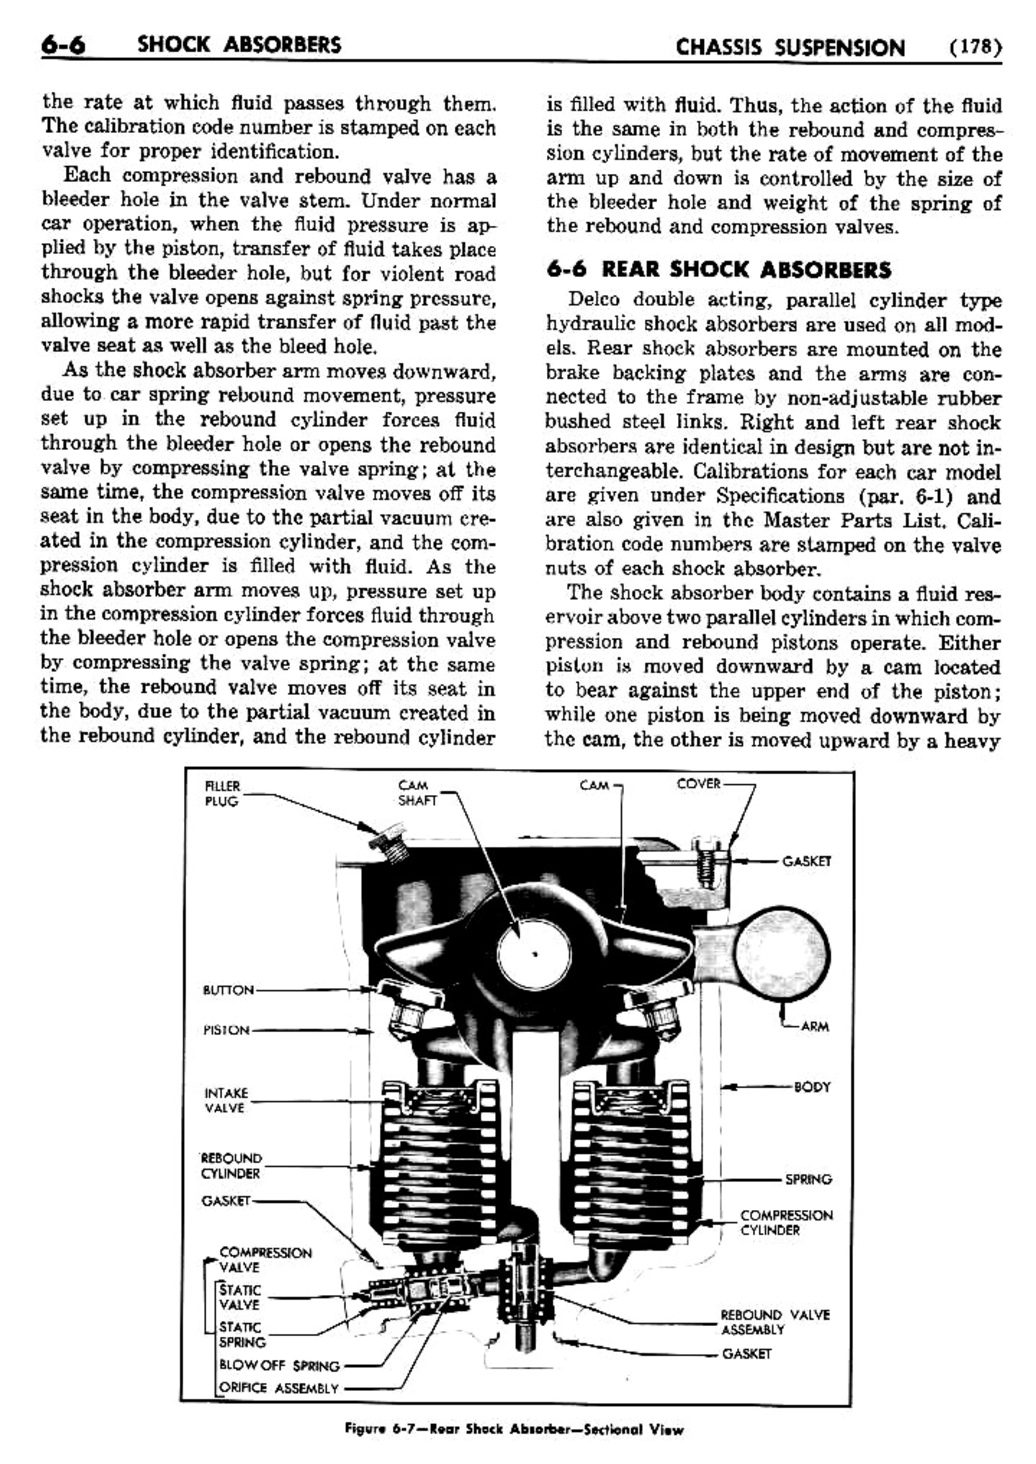 n_07 1950 Buick Shop Manual - Chassis Suspension-006-006.jpg